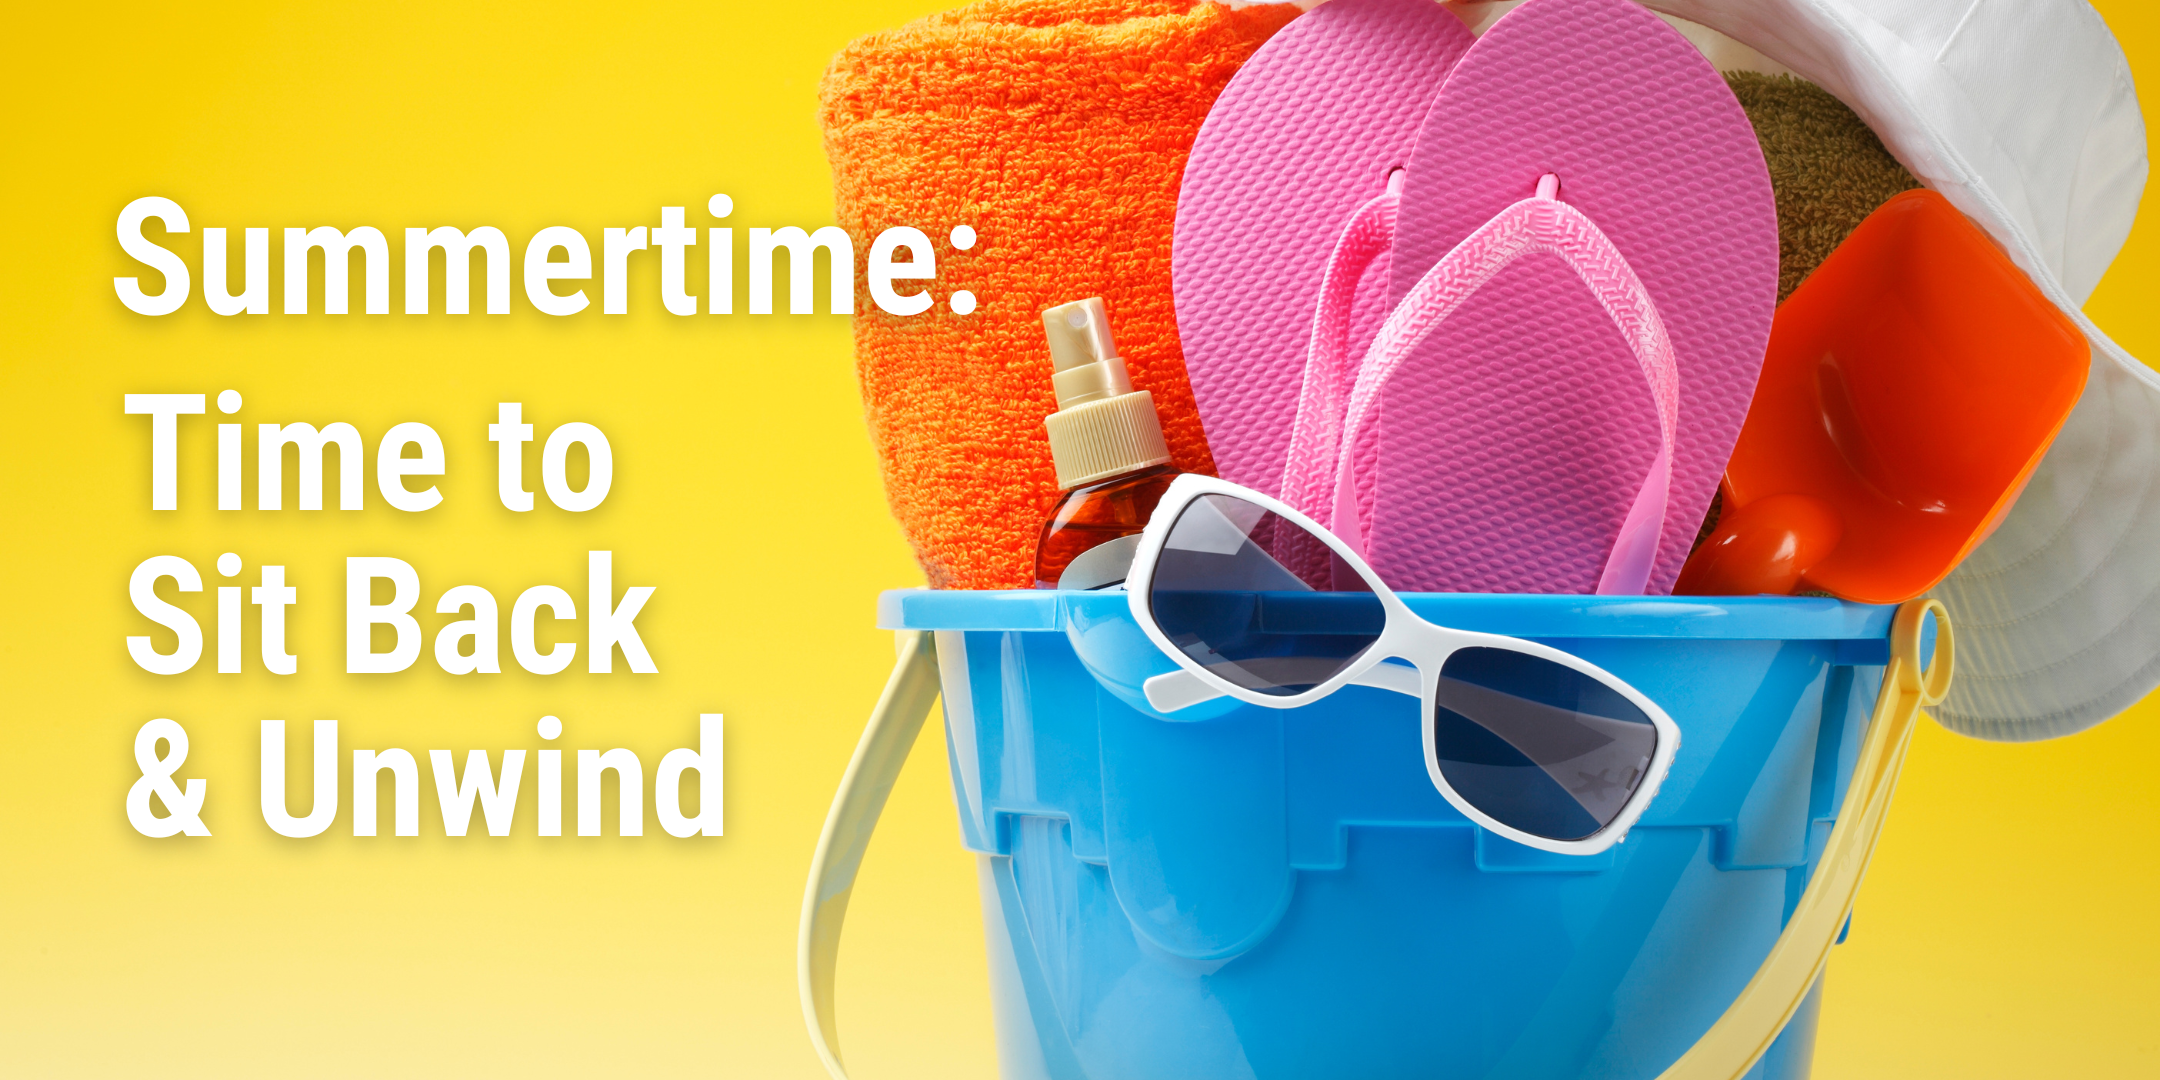 A yellow banner with a bucket full of beach supplies with text "Summertime: time to sit back and unwind"